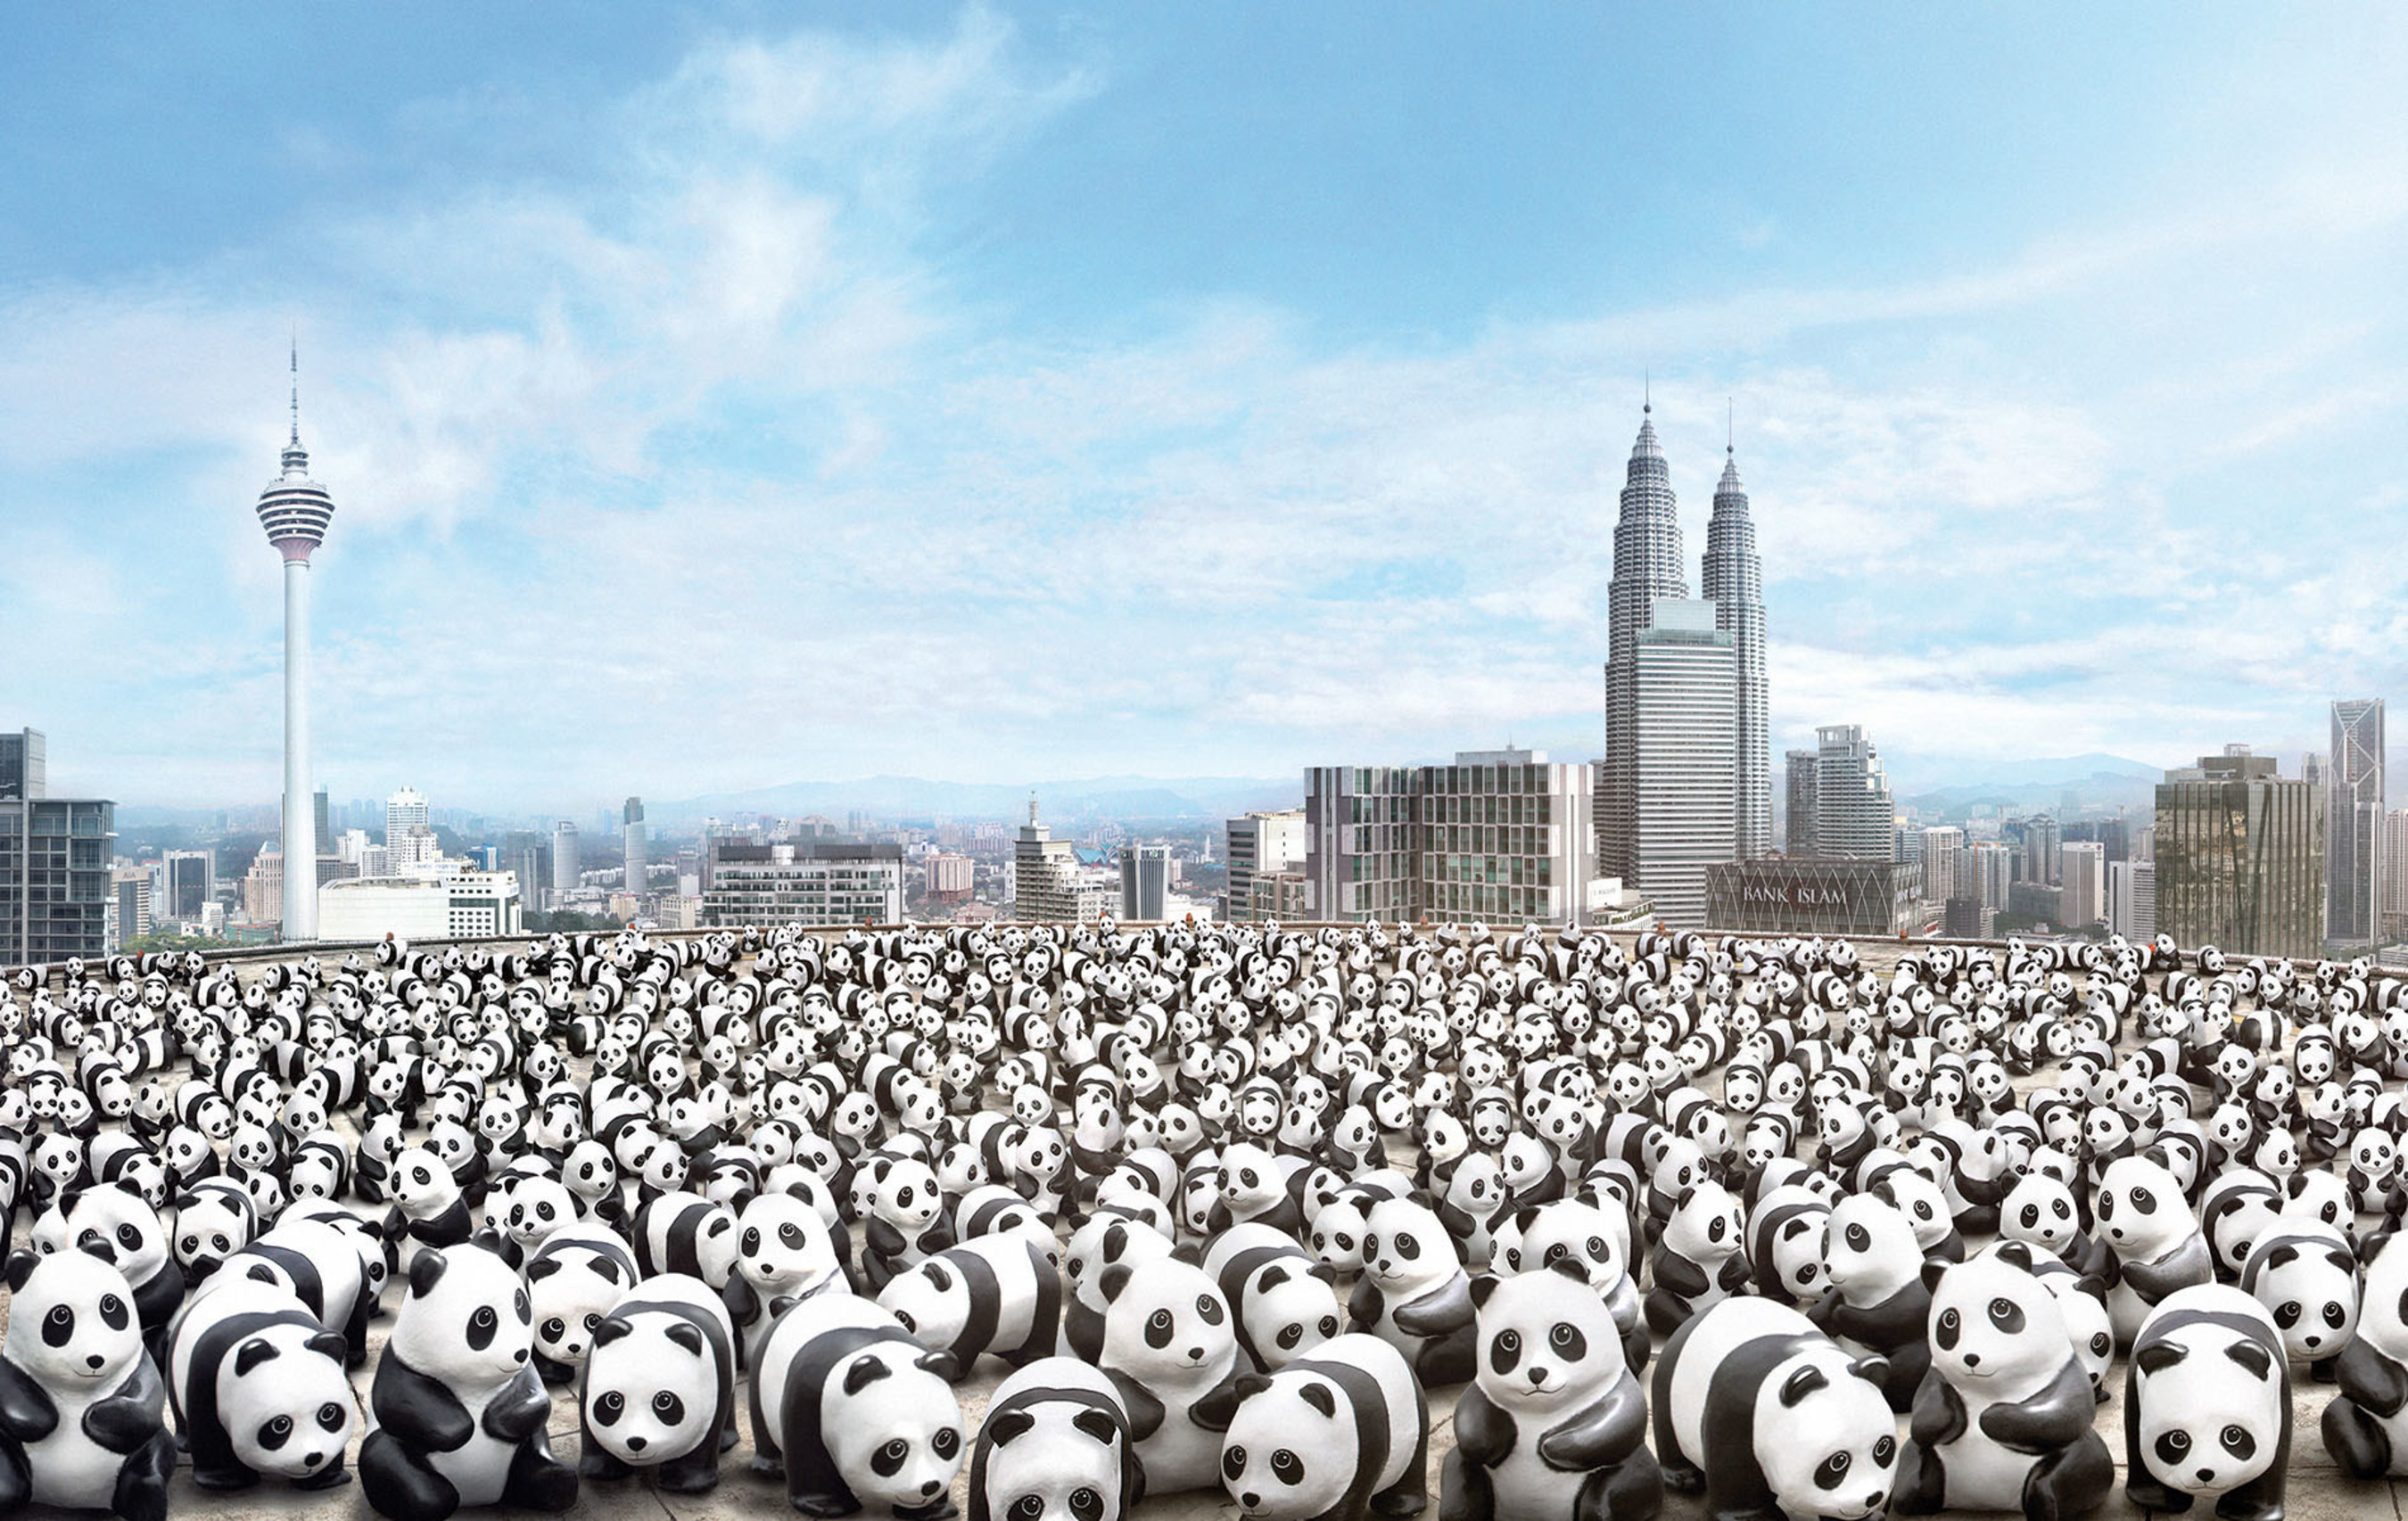 Facing the threat of extinction, the 1600 paper mache Pandas specially designed by Paulo Grangeon aimed to promote the awareness on the need for panda conservation and sustainable development.